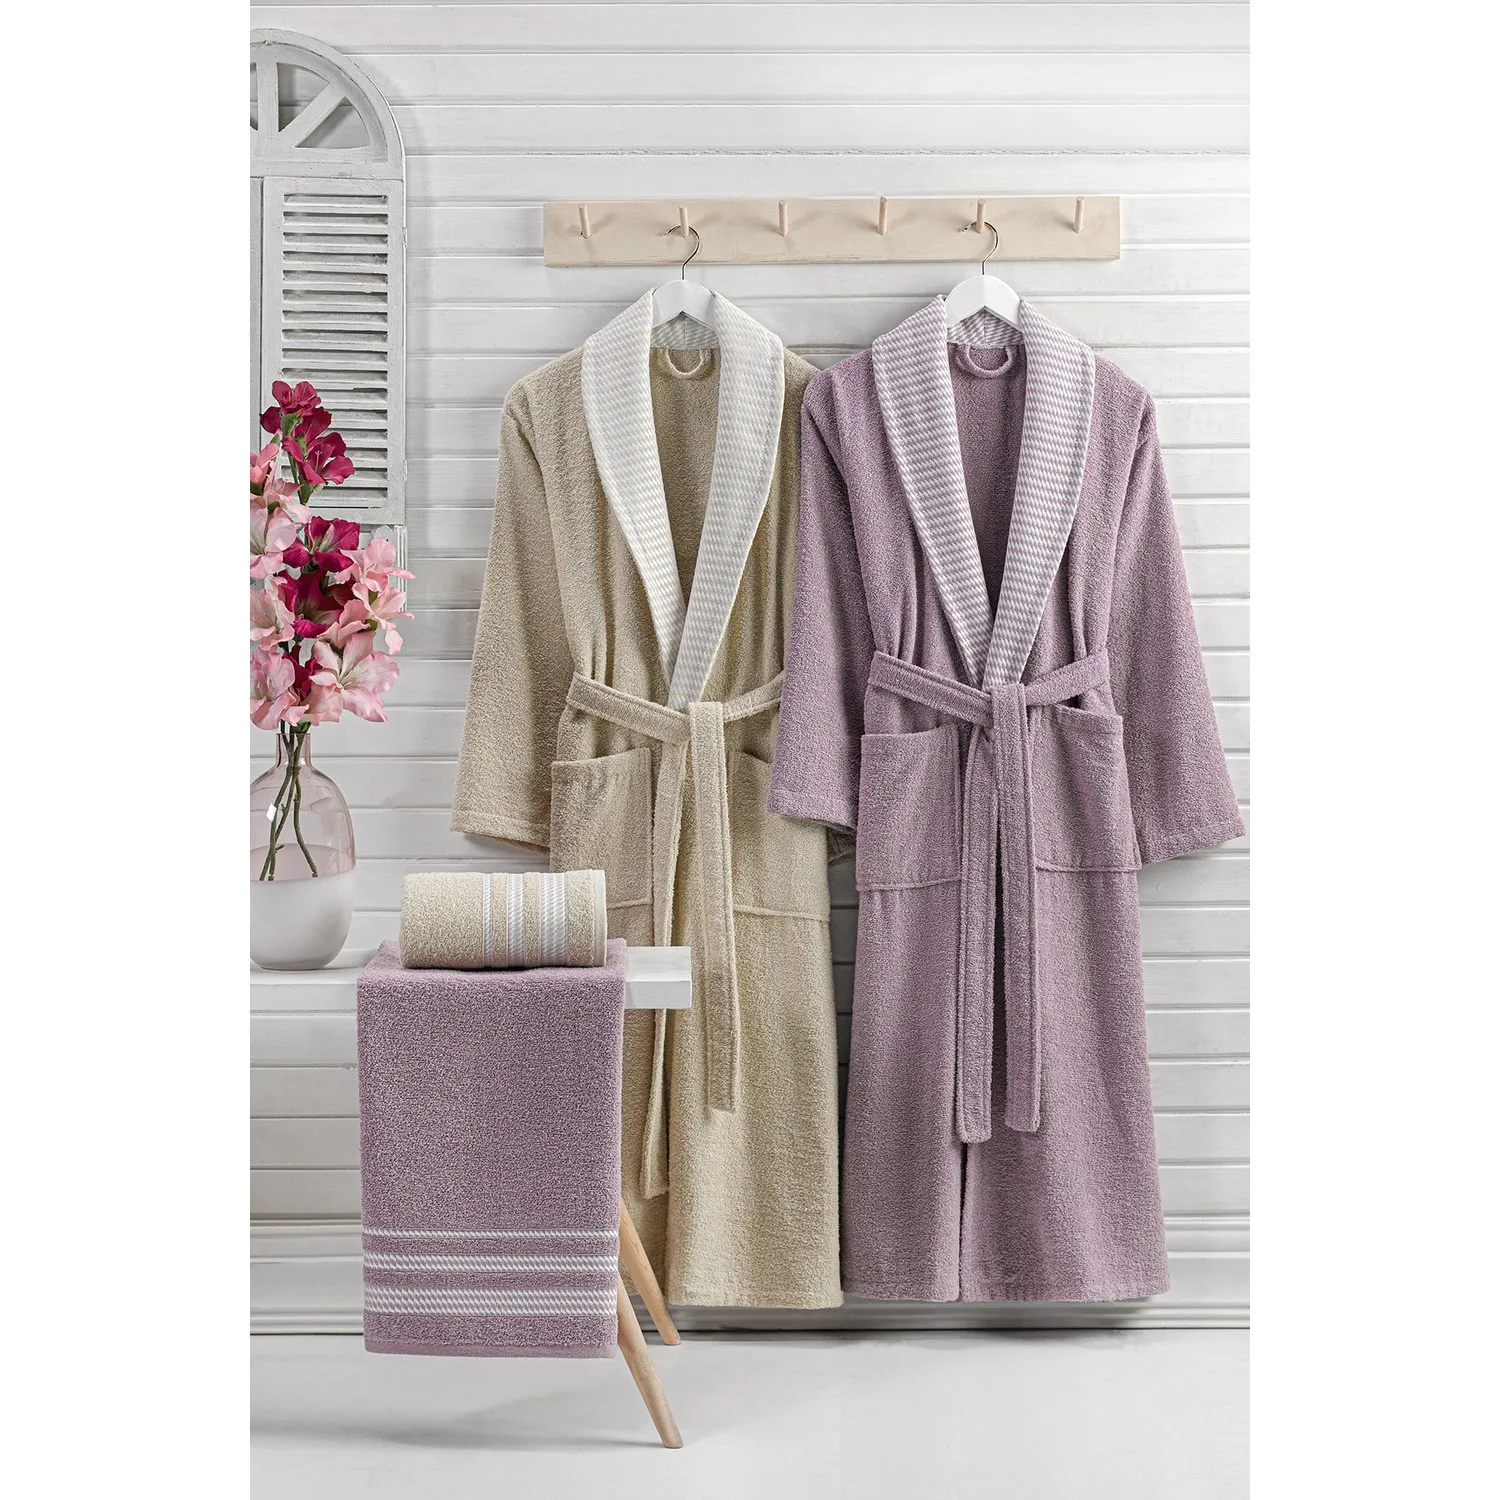 Özenev Royal 4 Piece Family Robe Set Cotton Soft Plaids Luxury Geometric Beige Lilac First Class Quality Casual Comfortable Use